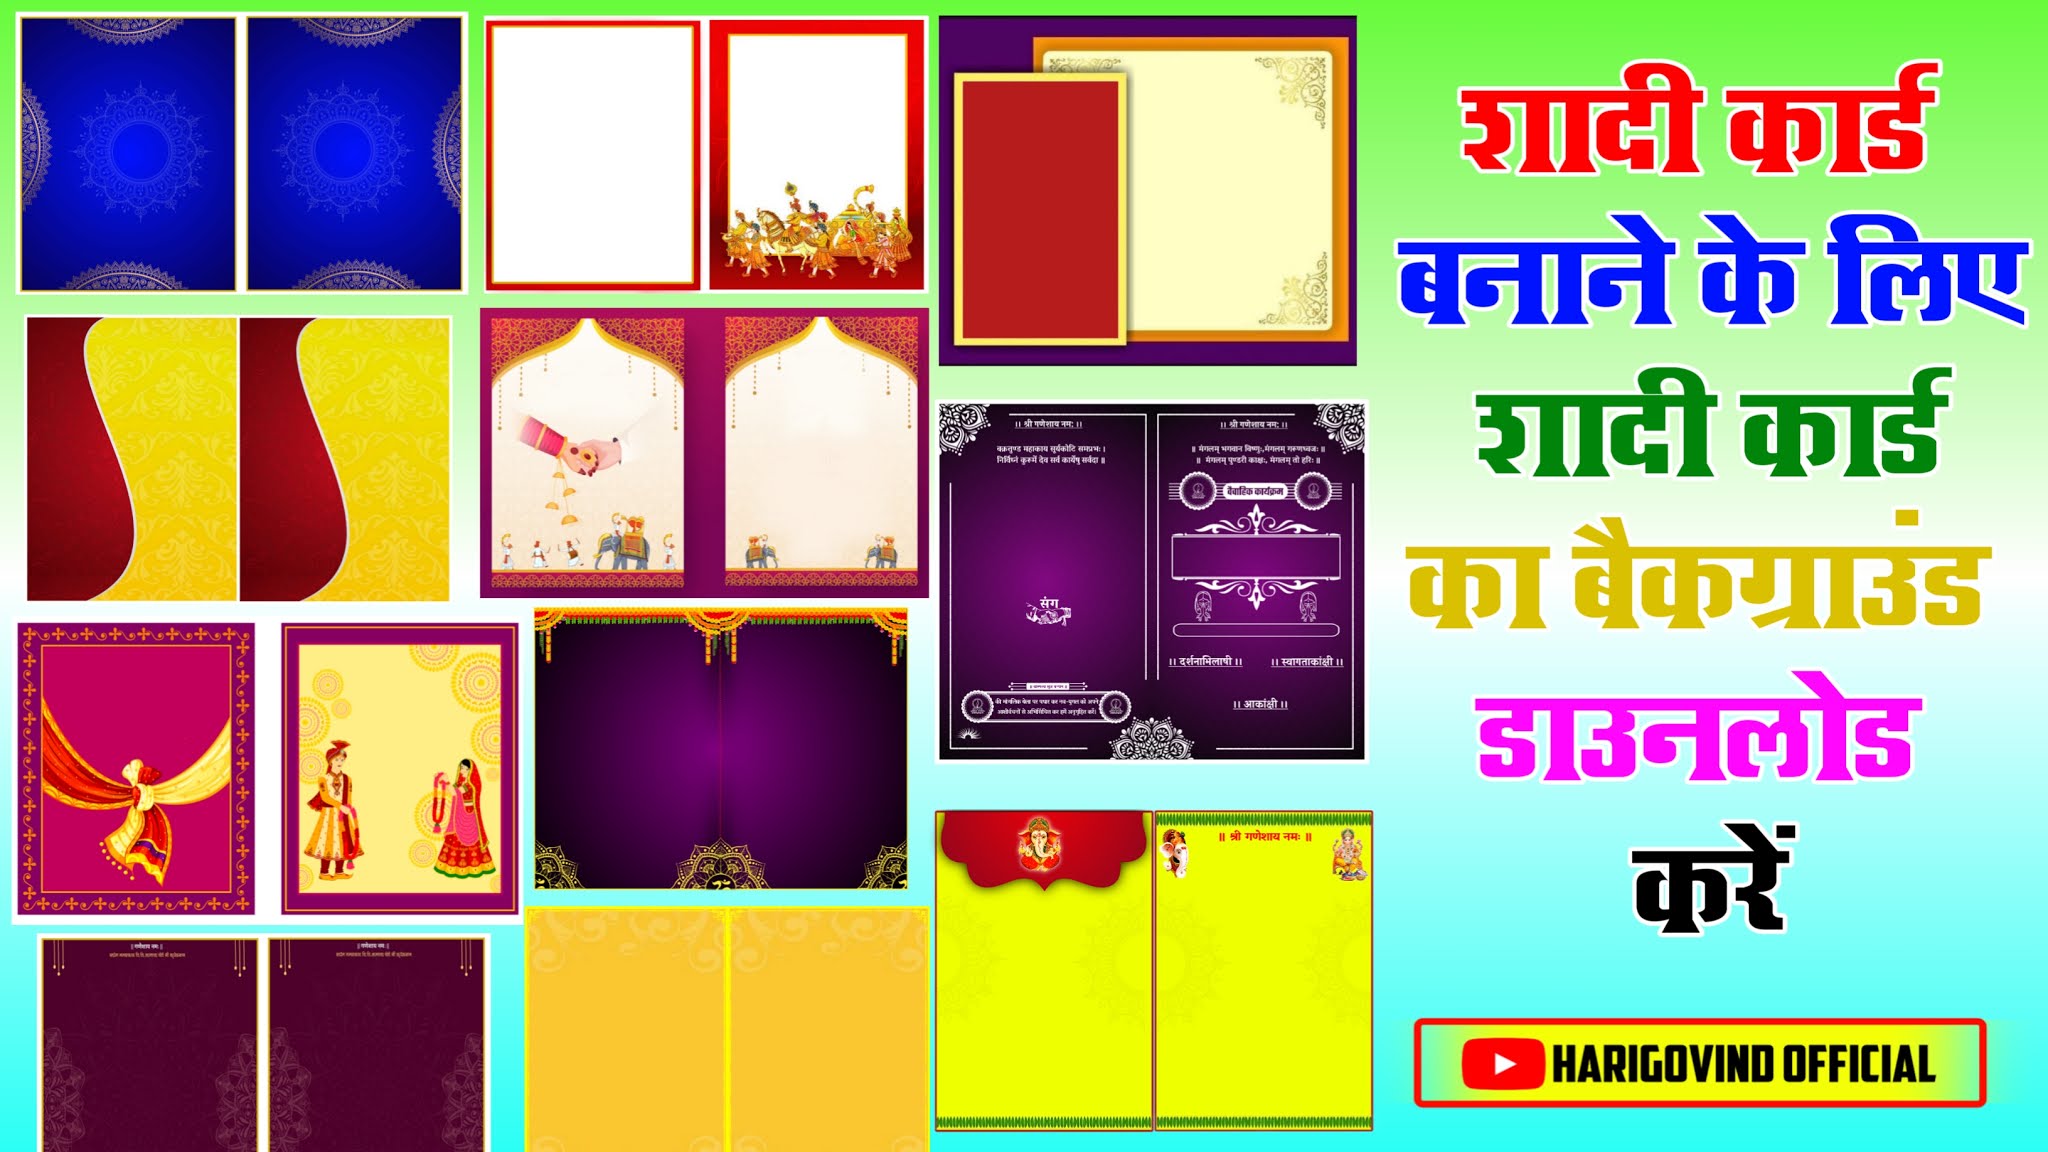 How to download wedding card background | Shadi Card background download  kare | Background Download kare 2021